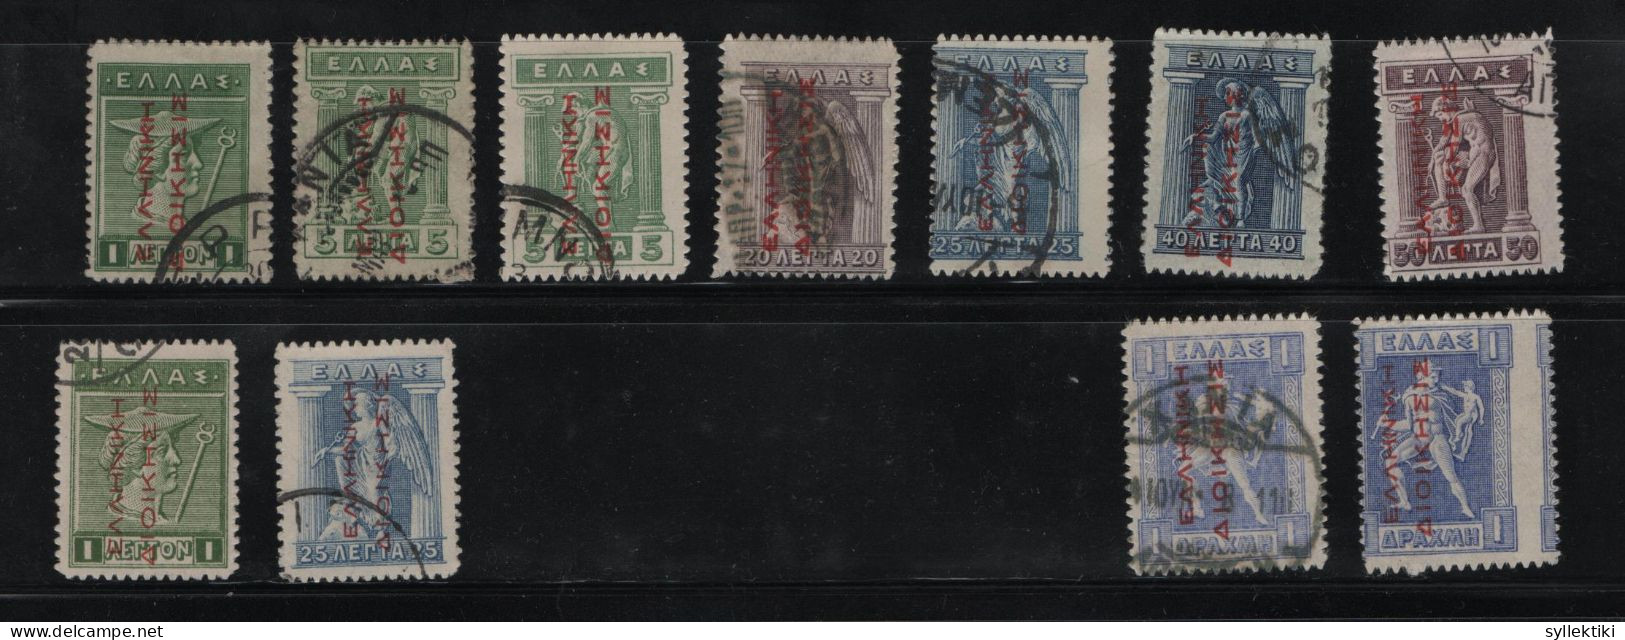 GREECE 1913 GREEK ADMIN READING UP RED & CARMIN 1 LEPTON - 1 DRACHMA 11 USED STAMPS  HELLAS No 271 - 278, 290, 295 AND V - Used Stamps